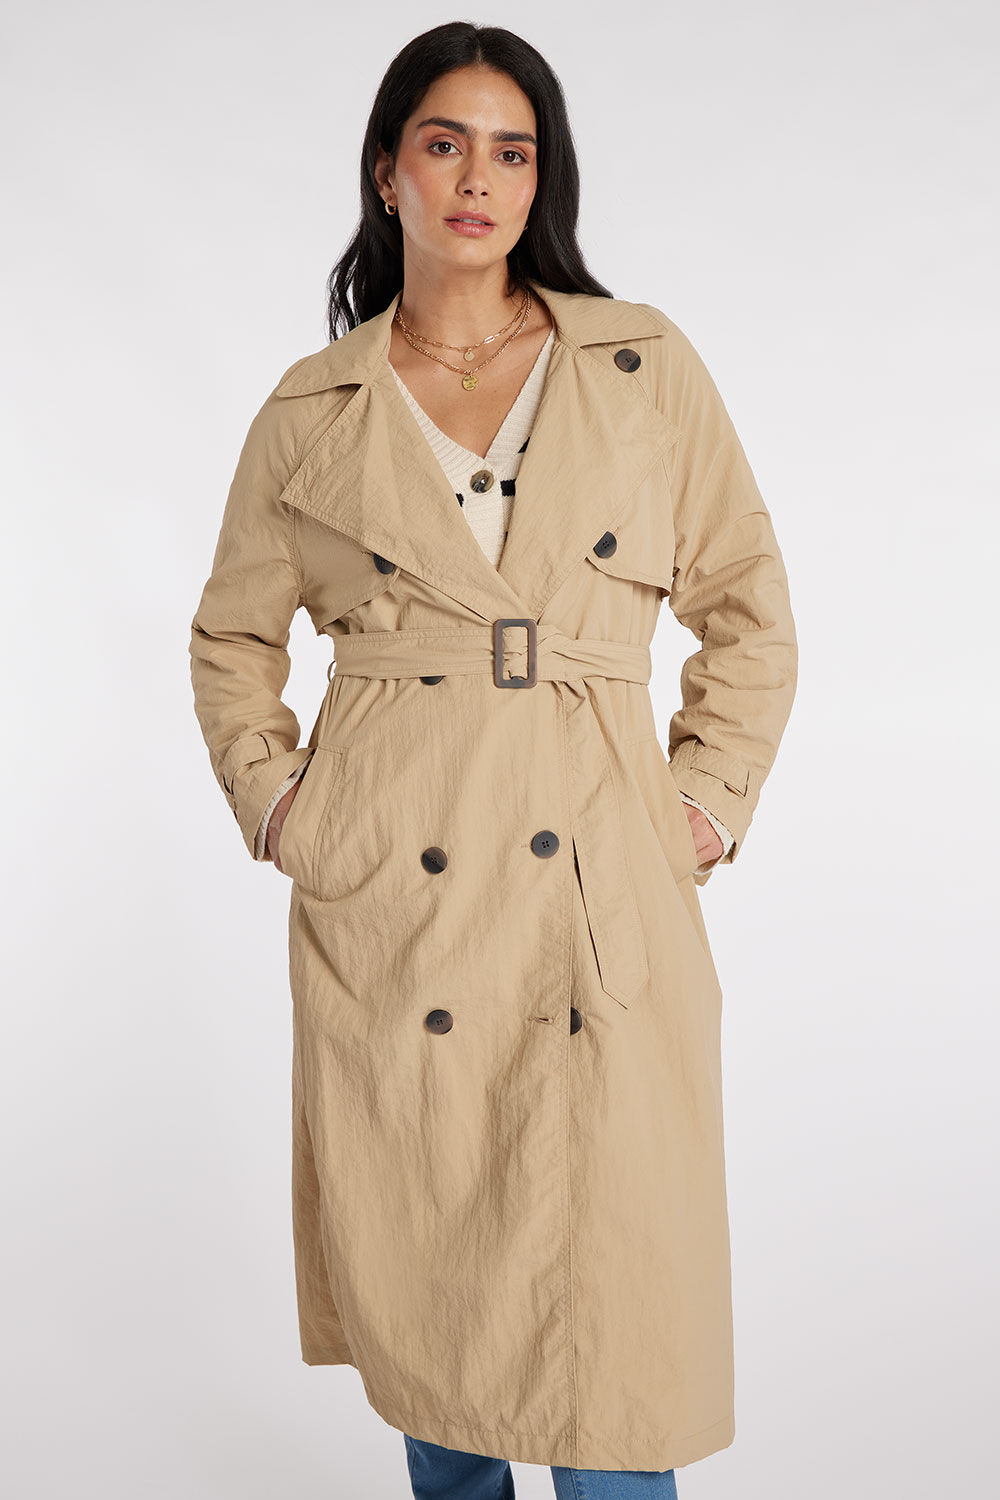 Brave Soul Tan - Trench Style Coat, Size: 14